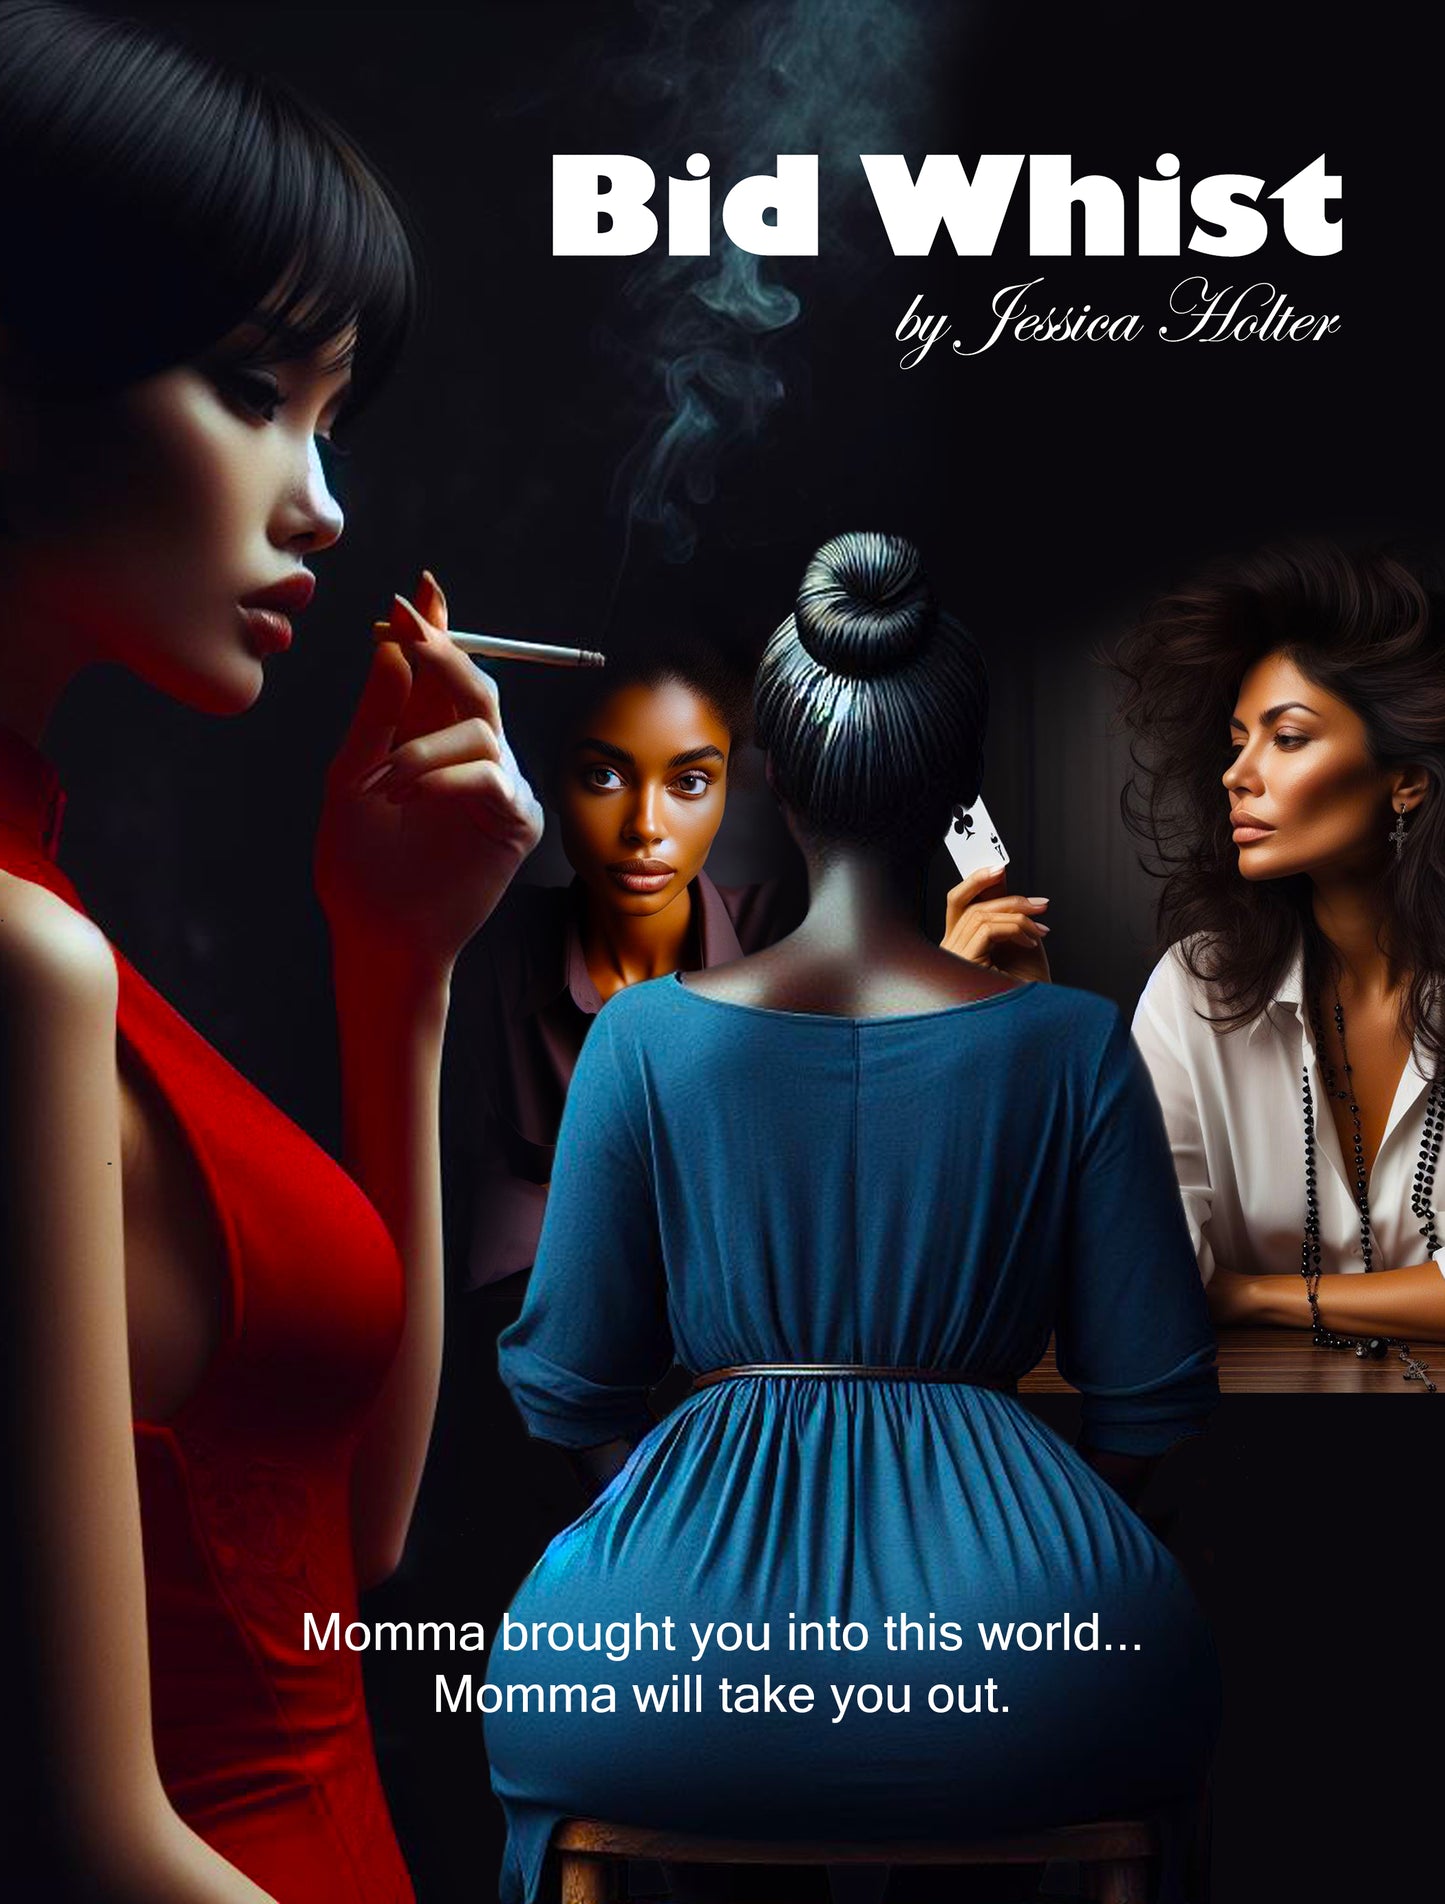 Book: Bid Whist: The Mother's Game (Novel)